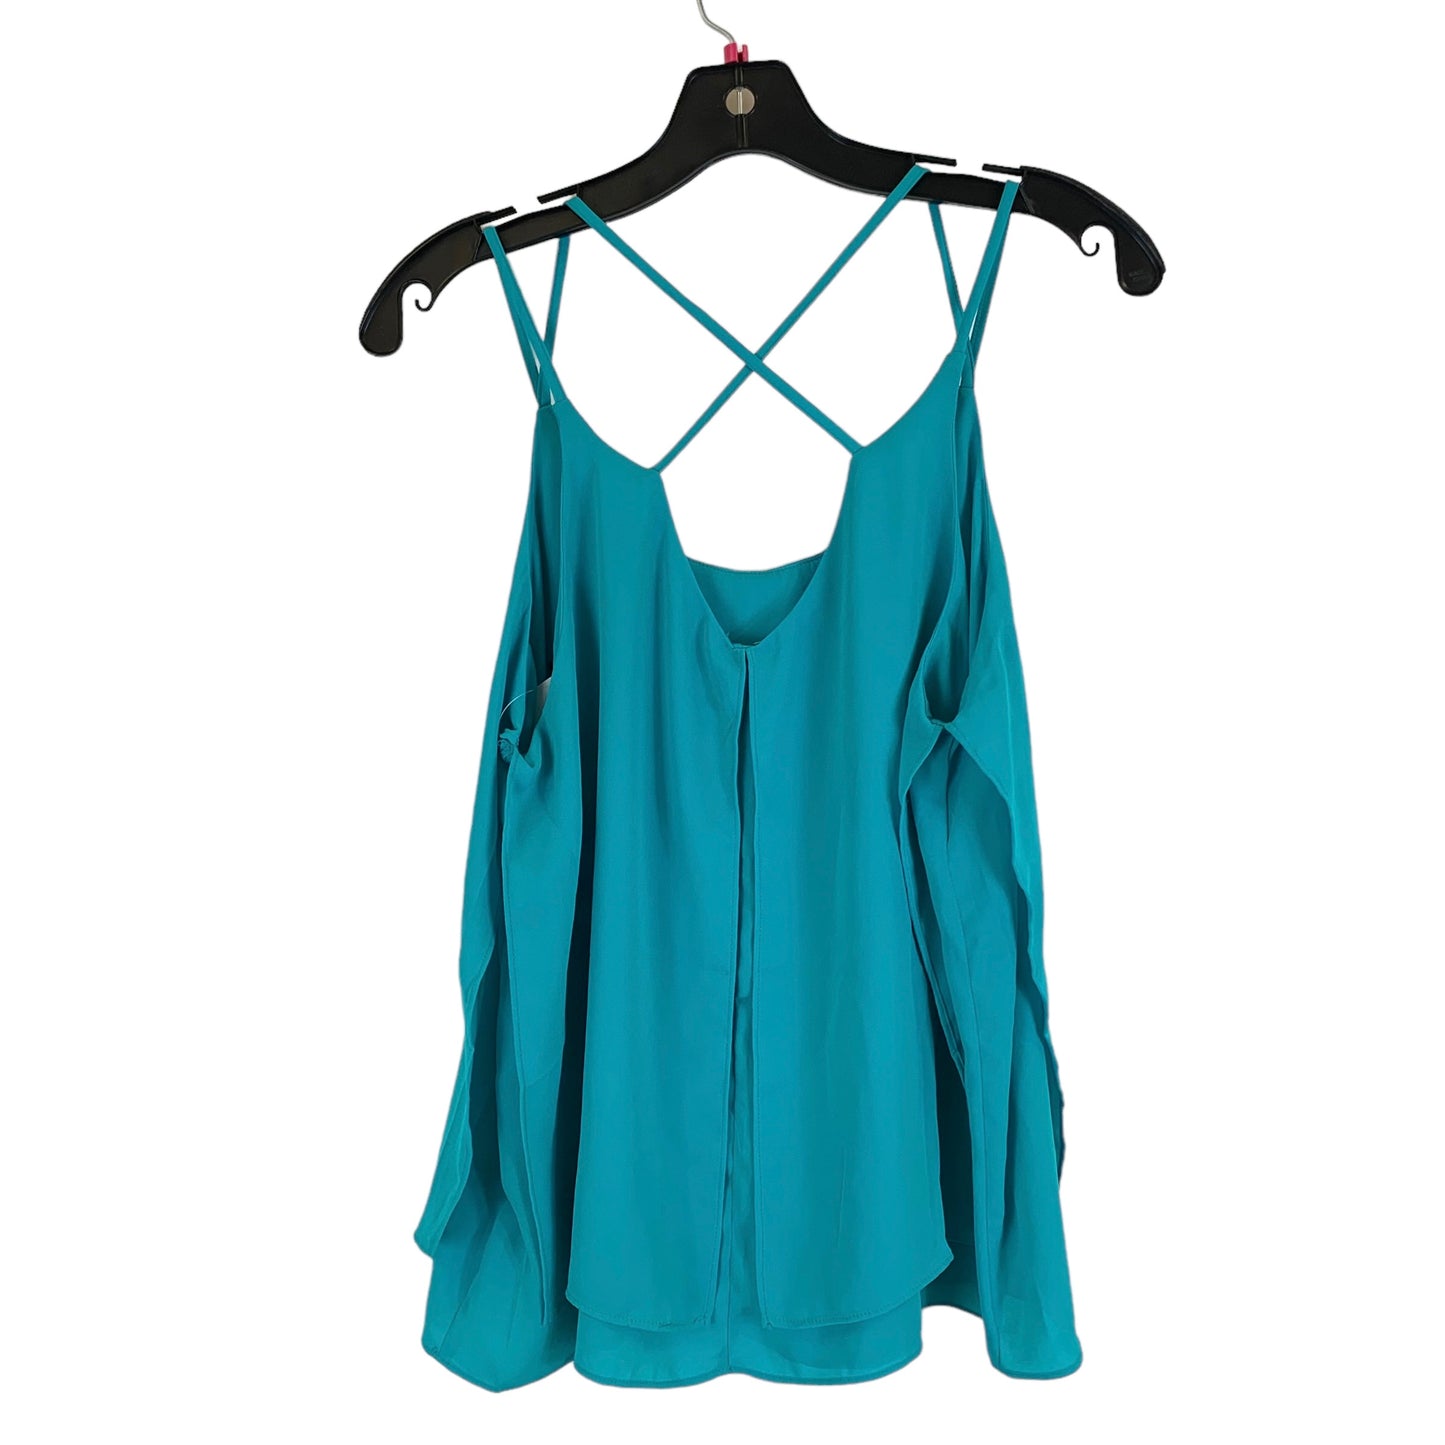 Top Sleeveless By Limited  Size: M